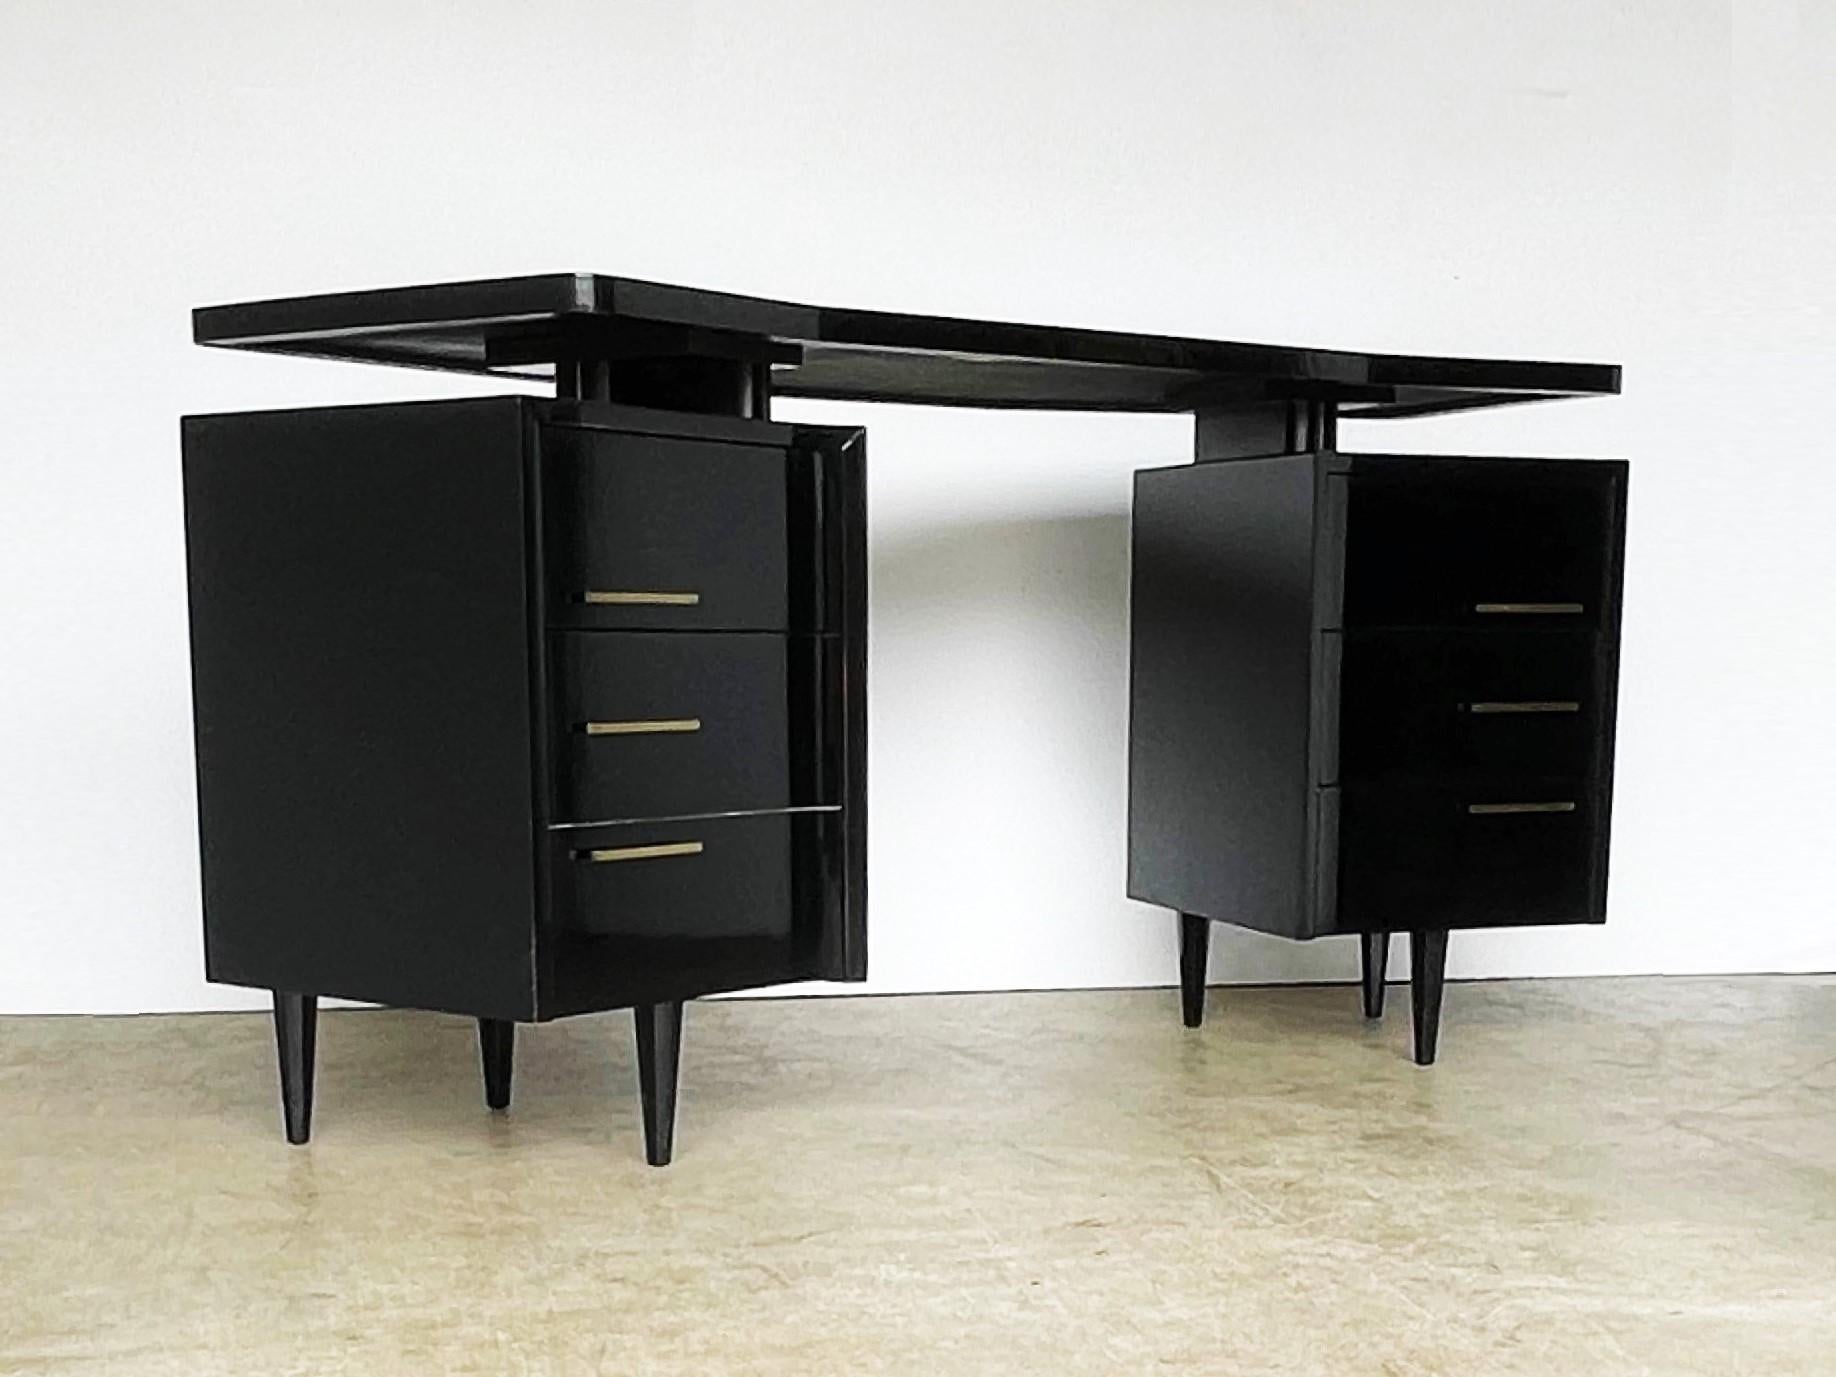 Stylize your room with this impressive writing desk. This unusual desk takes its inspiration from Art Deco design. It has a curved design that gives it a distinctive appeal and a large floating surface work area has an advantage over a traditional